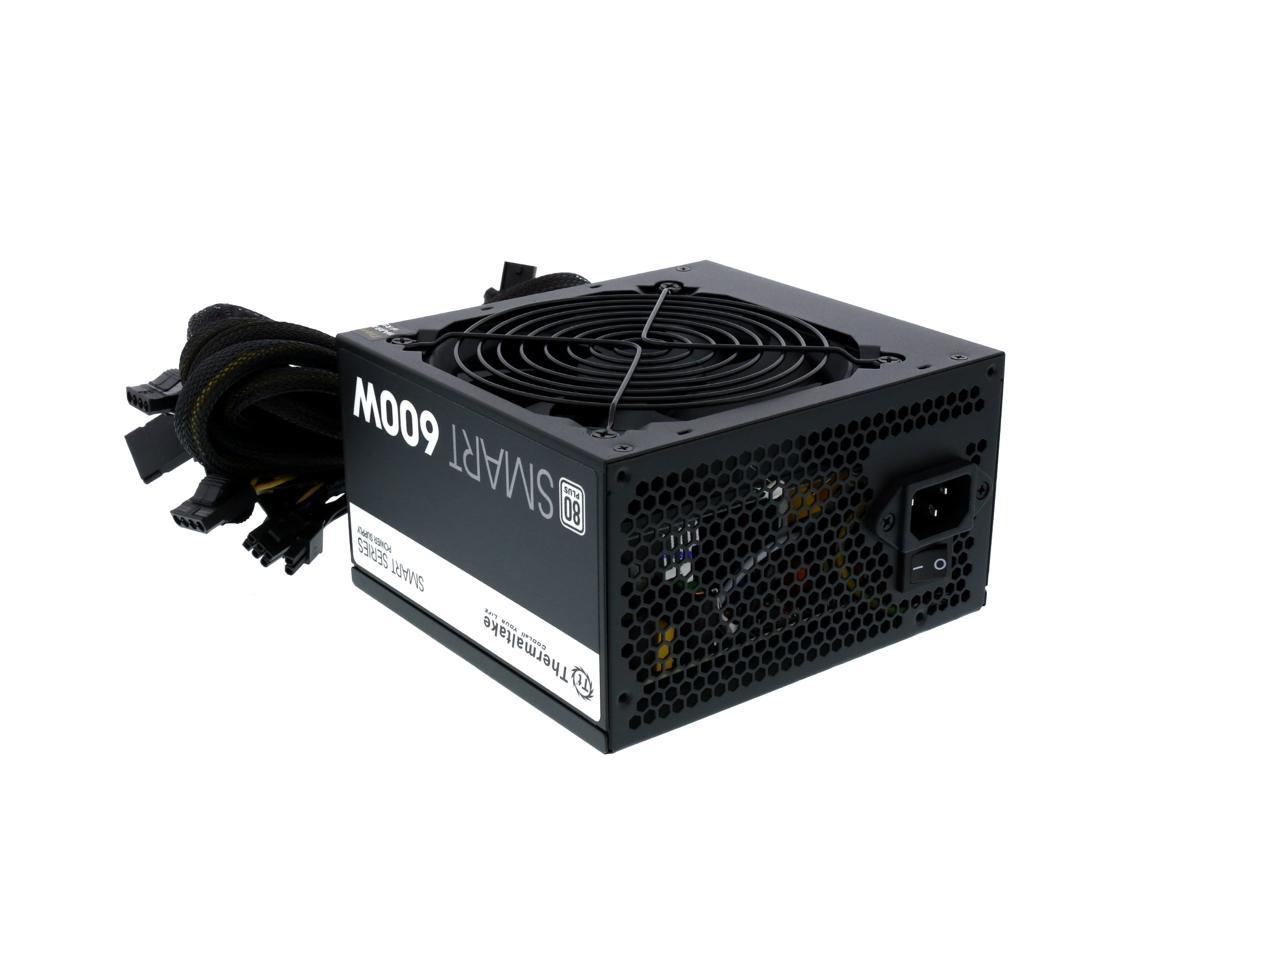 thermaltake-smart-series-600w-sli-crossfire-ready-continuous-power